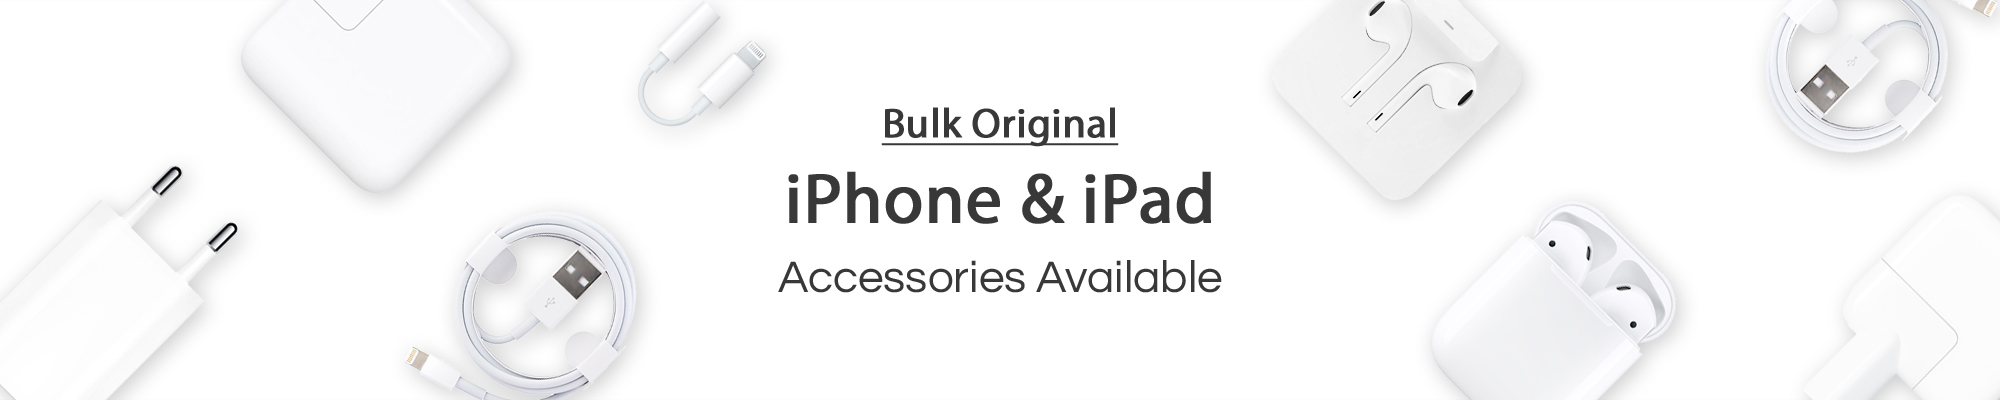 Original accessories available for Apple